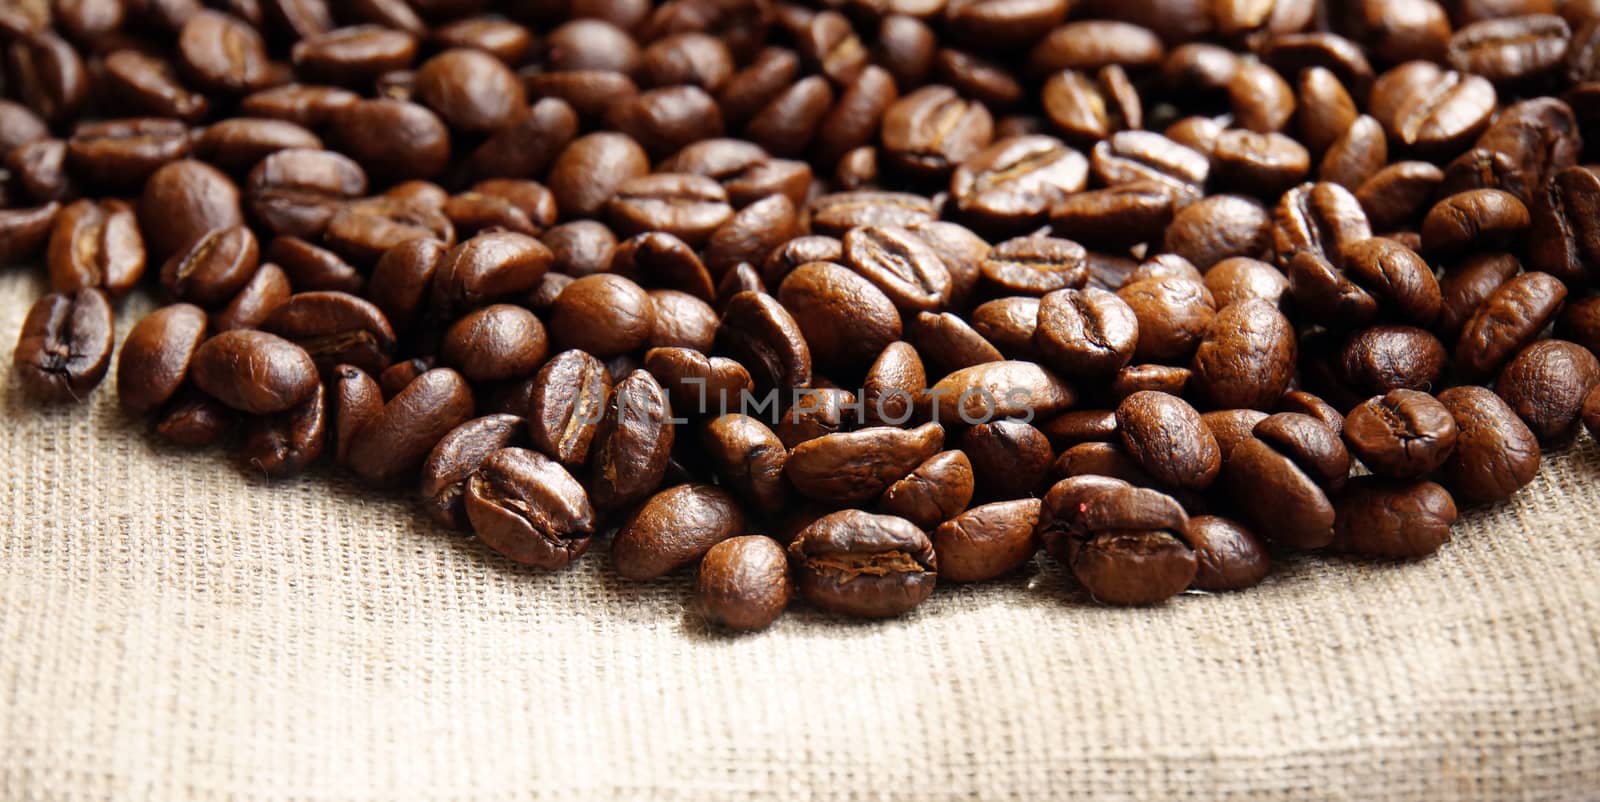 Background from coffee beans on fabric closeup by Chiffanna